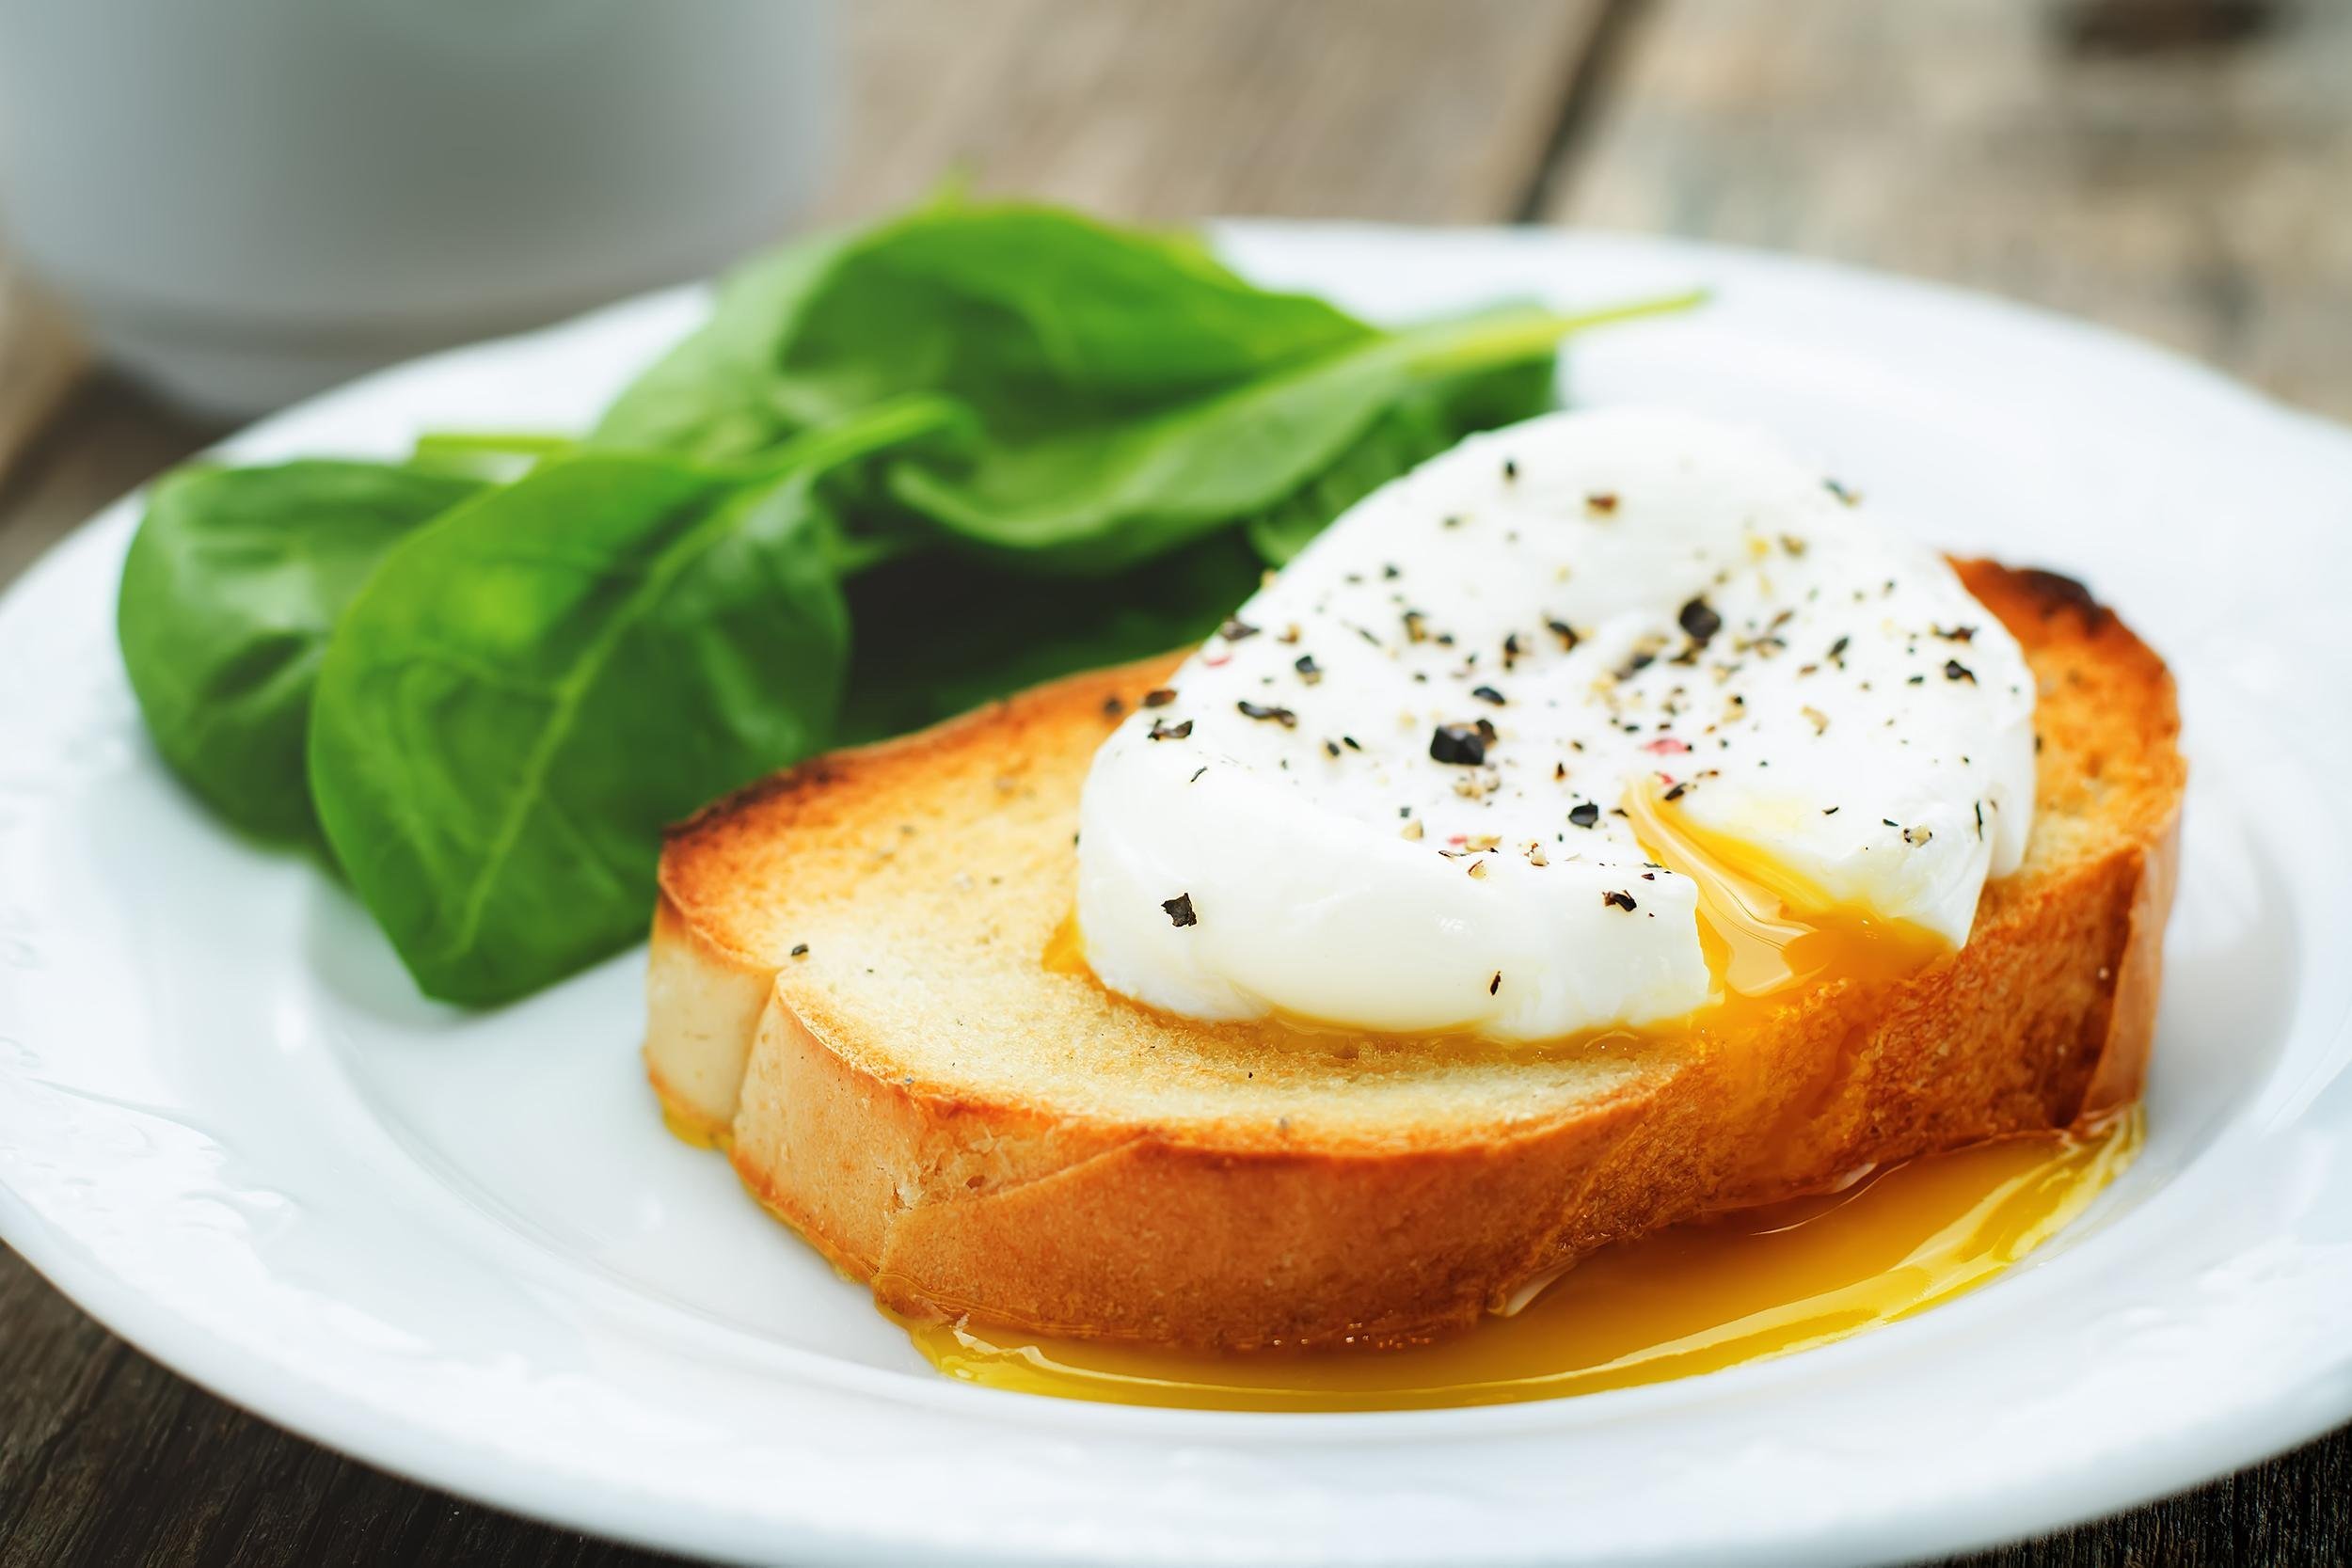 <p>The simplest use for poached eggs is to serve them on toast, although they're also an ingredient in <a href="https://blog.cheapism.com/breakfast-food-calories-17562/">recipes such as eggs Benedict</a>. Start by filling a saucepan with water 2 inches deep. Add one-half teaspoon vinegar and bring to a simmer — not a full boil. Meanwhile, break an egg (be sure it's fresh) into a small cup or bowl. When the water is simmering, stir it gently to create a slow whirlpool in the center of the pan. Slide the egg into the water (don't let it touch the bottom). The egg should cook for about 2 minutes for a runny yolk, and 4 minutes for a firm yolk. Remove the poached egg with a slotted spoon and place on paper towel to absorb excess water. For perfect results, serve poached eggs immediately, over toast.</p>